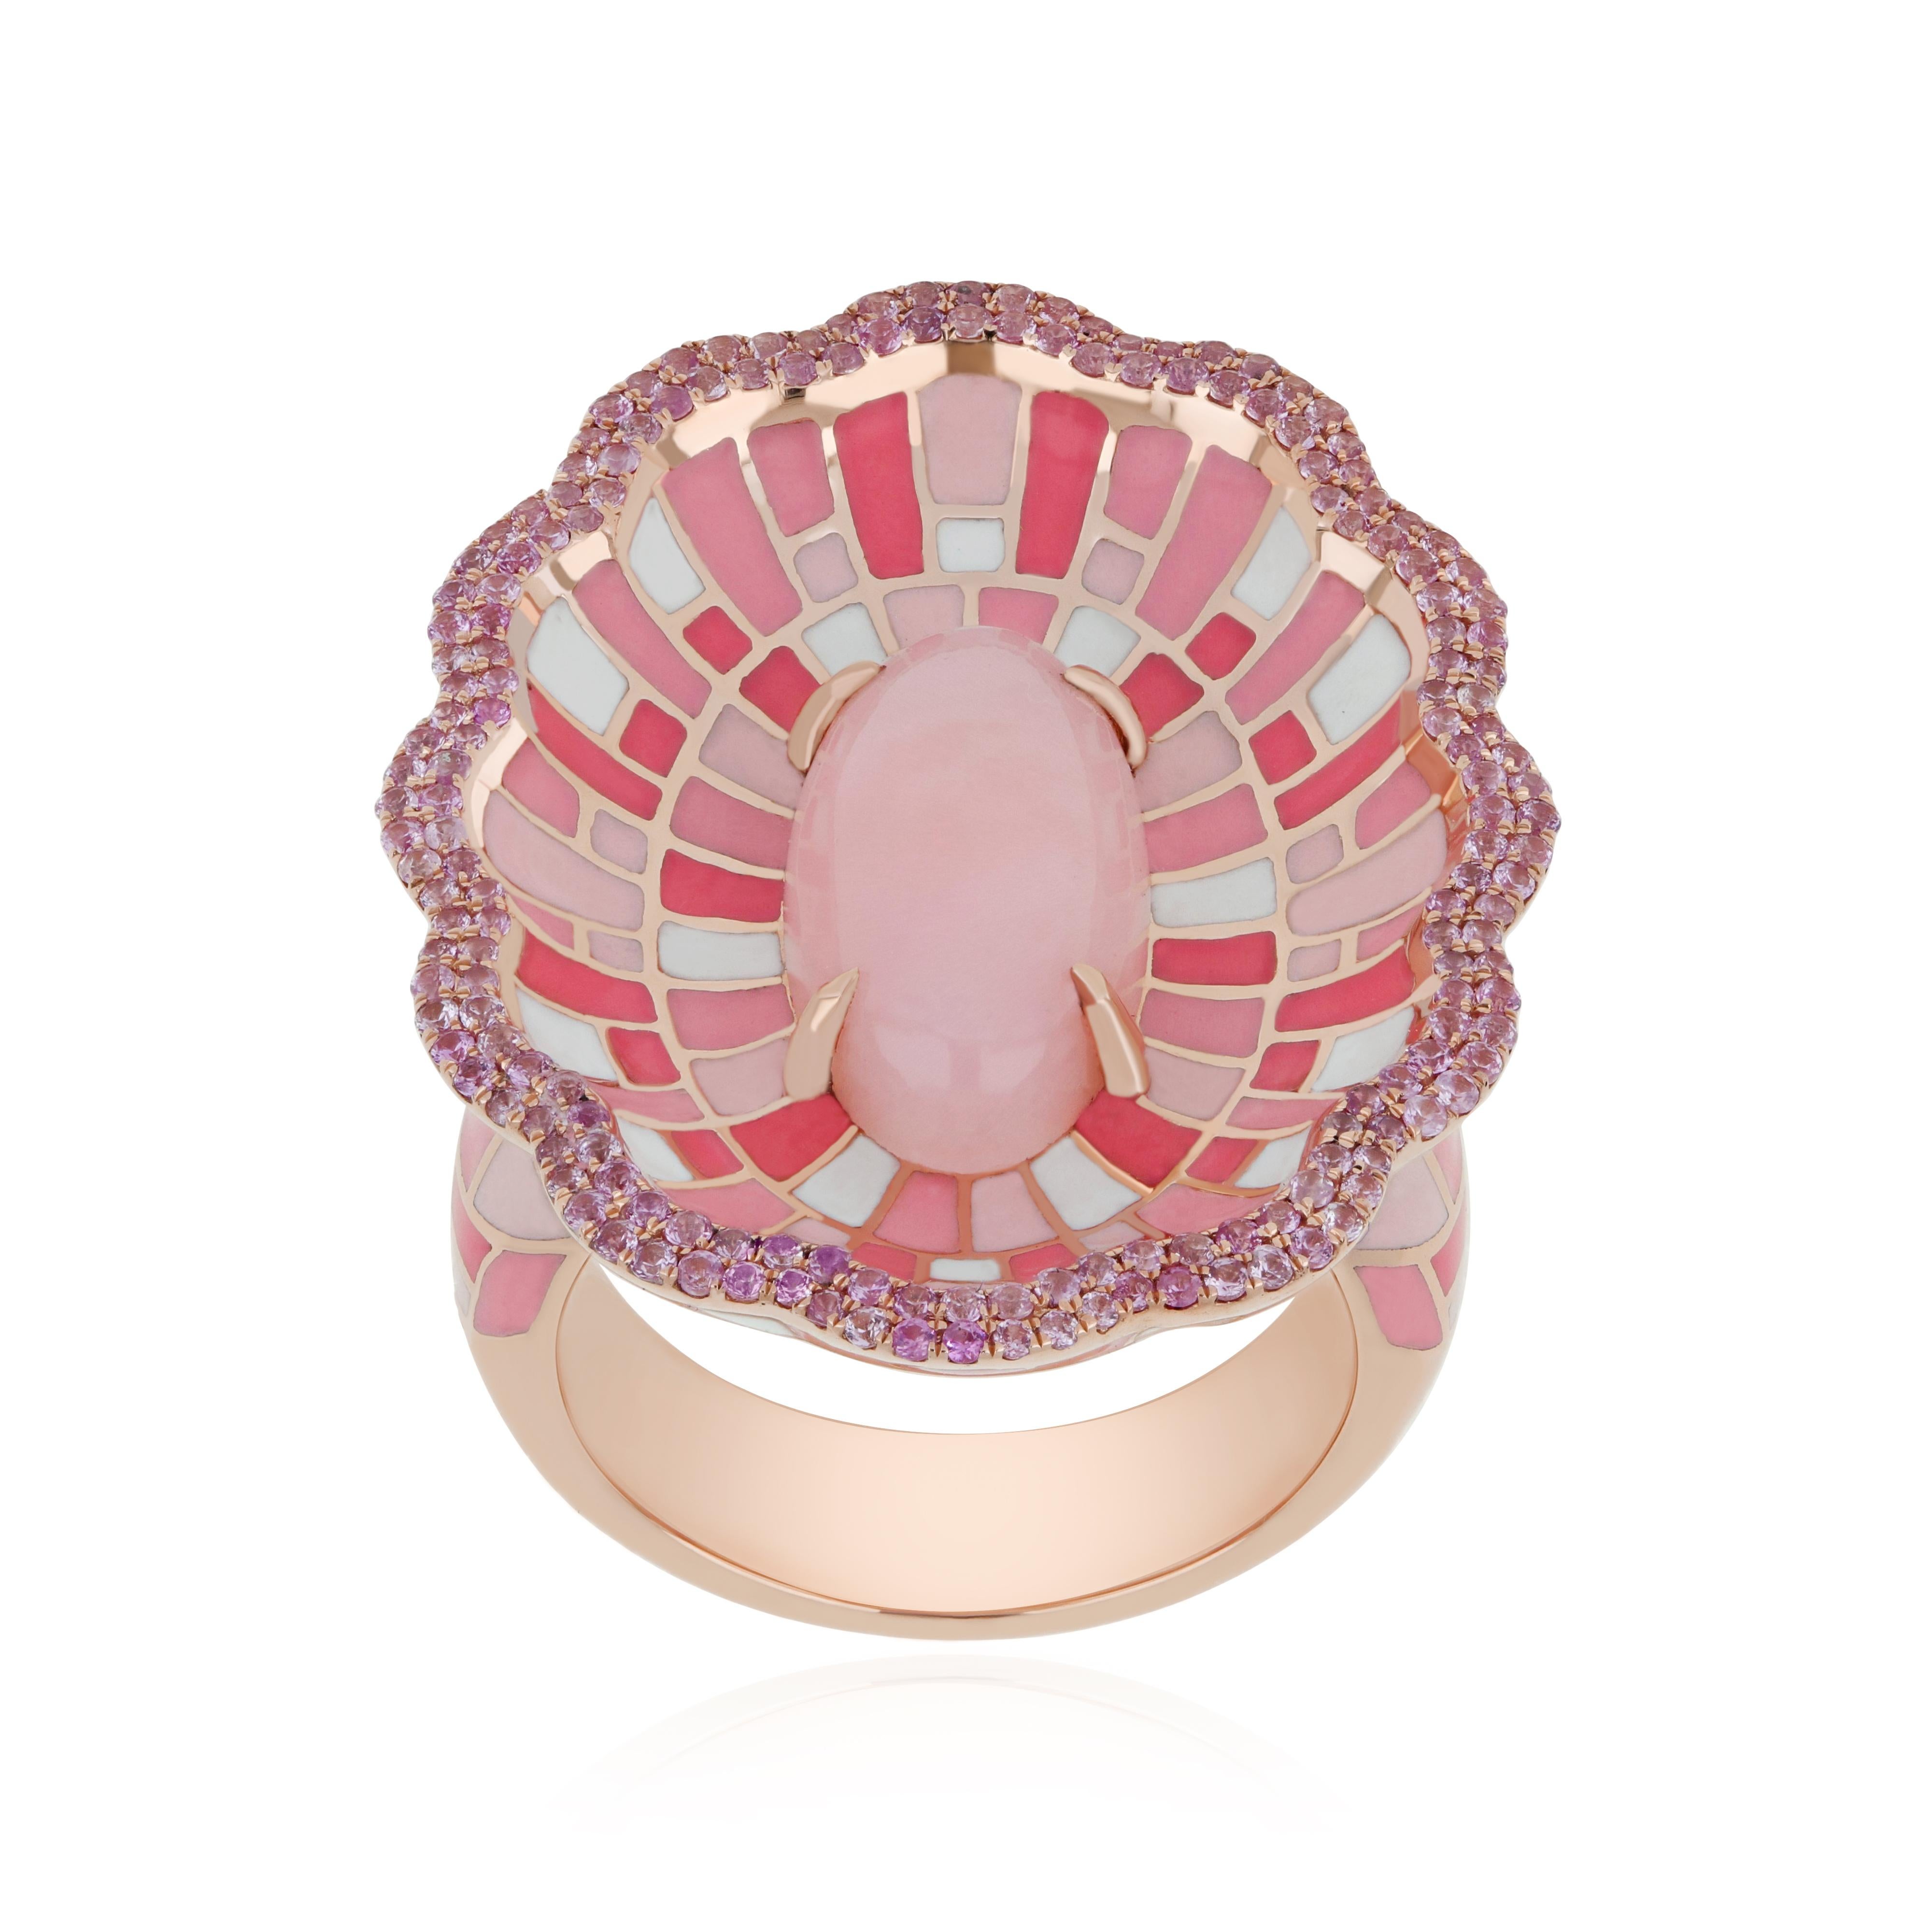 Immerse yourself in the epitome of luxury with our meticulously crafted 14 karat Rose Gold Ring. Adorned with a stunning 3.40 carat (approx.) Fancy Cut Pink Opal, this masterpiece is further elevated by a dazzling Halo of Pink Sapphires weighing